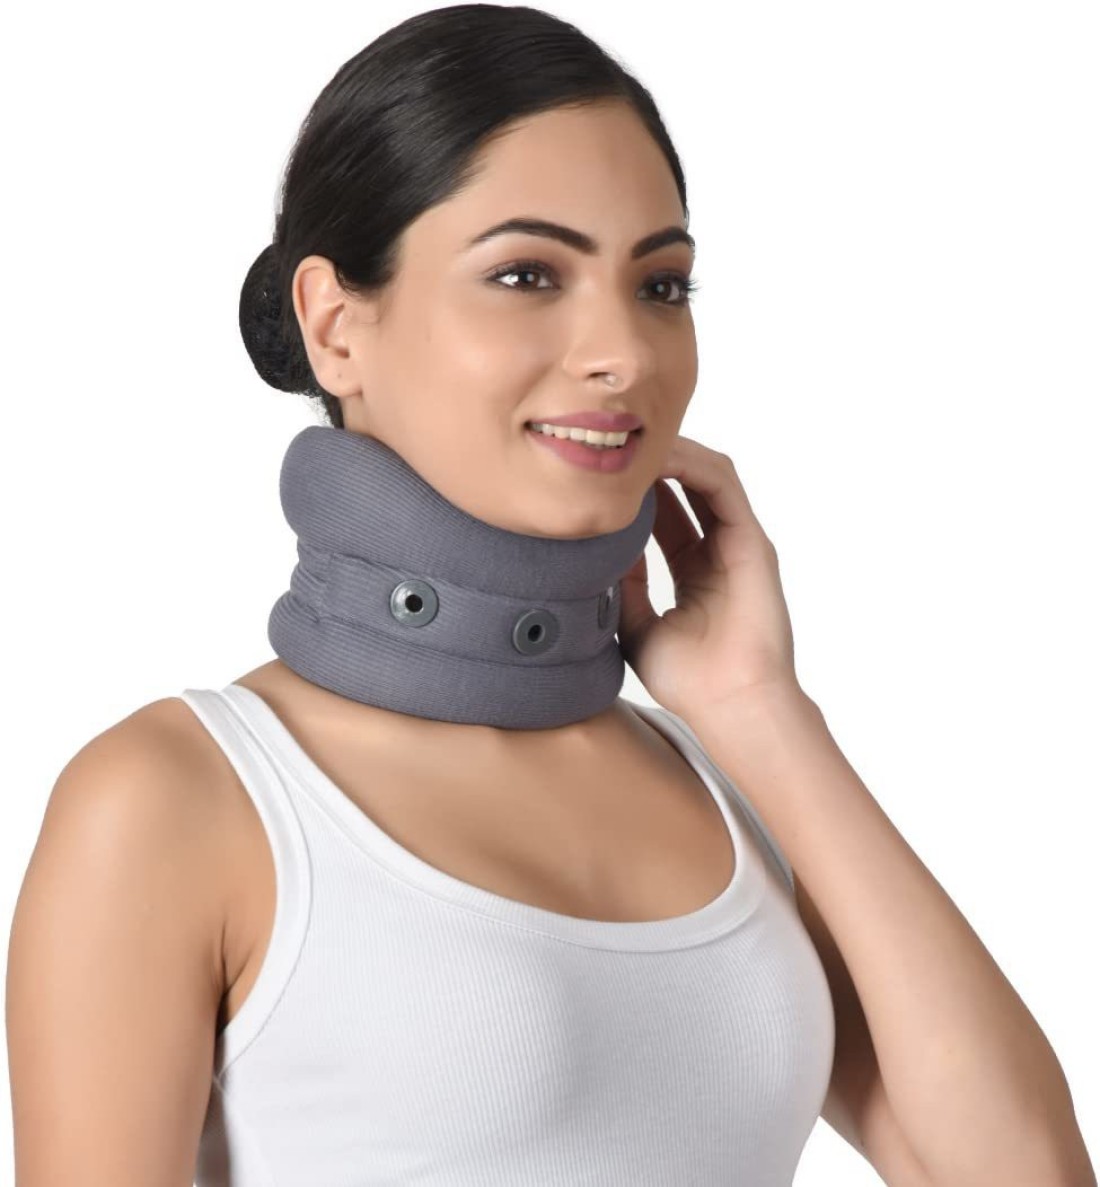 Mr and co AccuSure Elastic Soft Cervical Collar for adjusting the